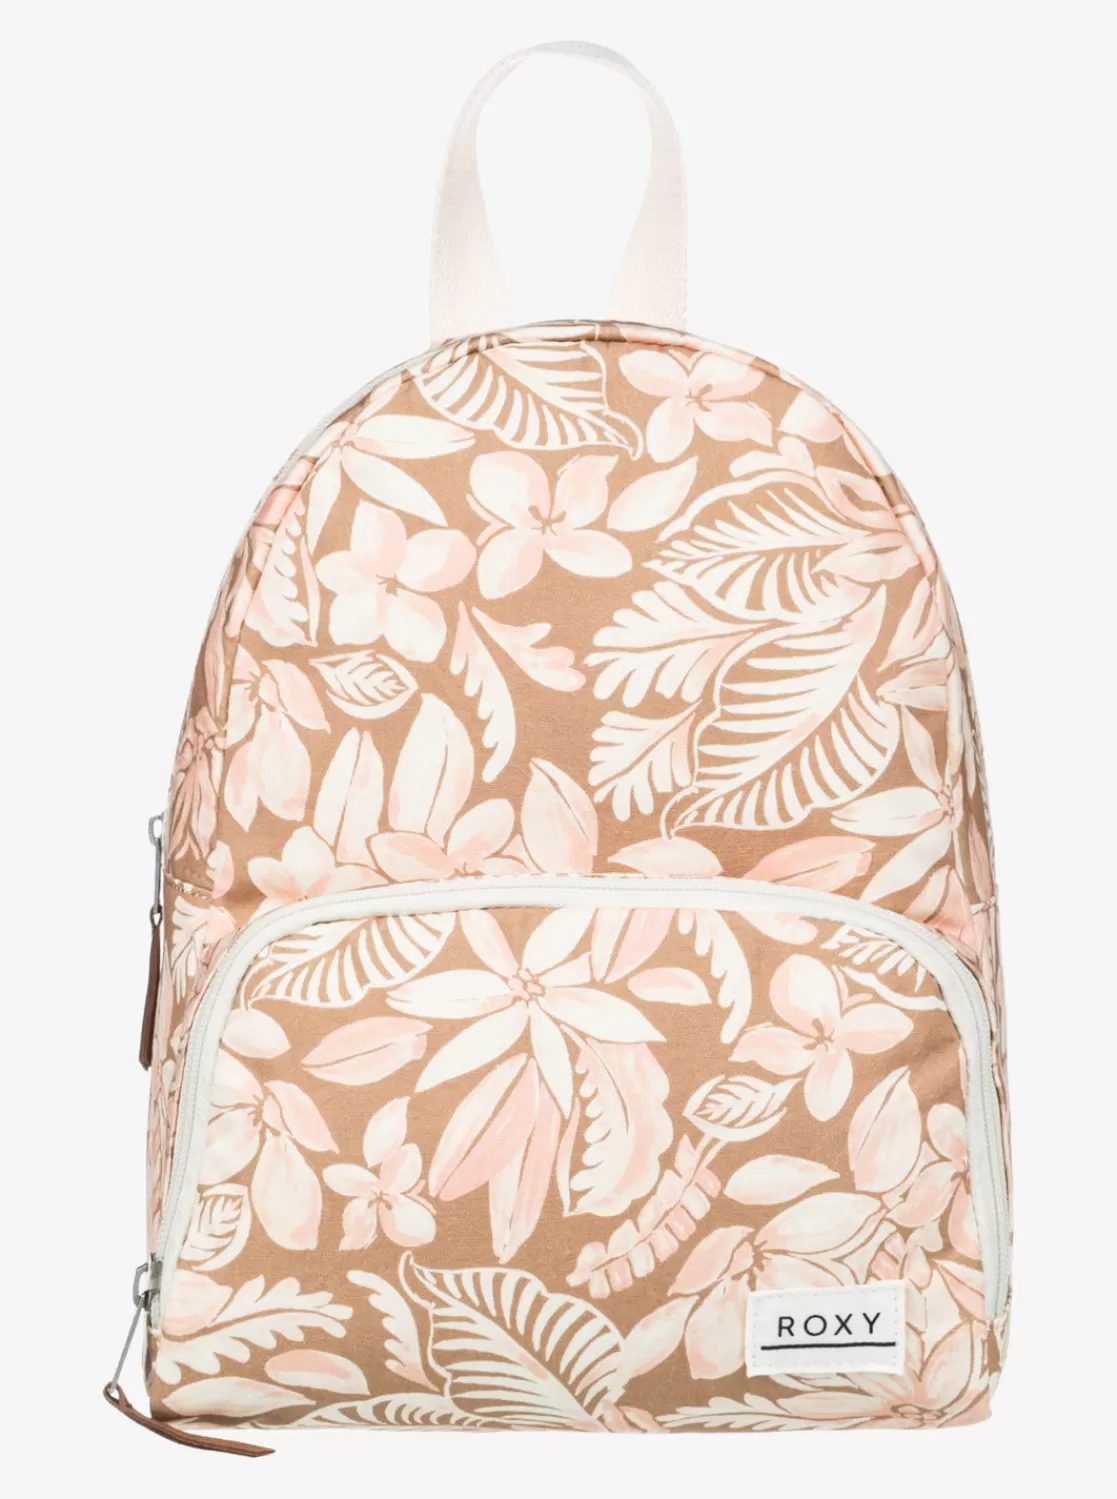 Always Core Canvas Extra Small Backpack-ROXY Flash Sale